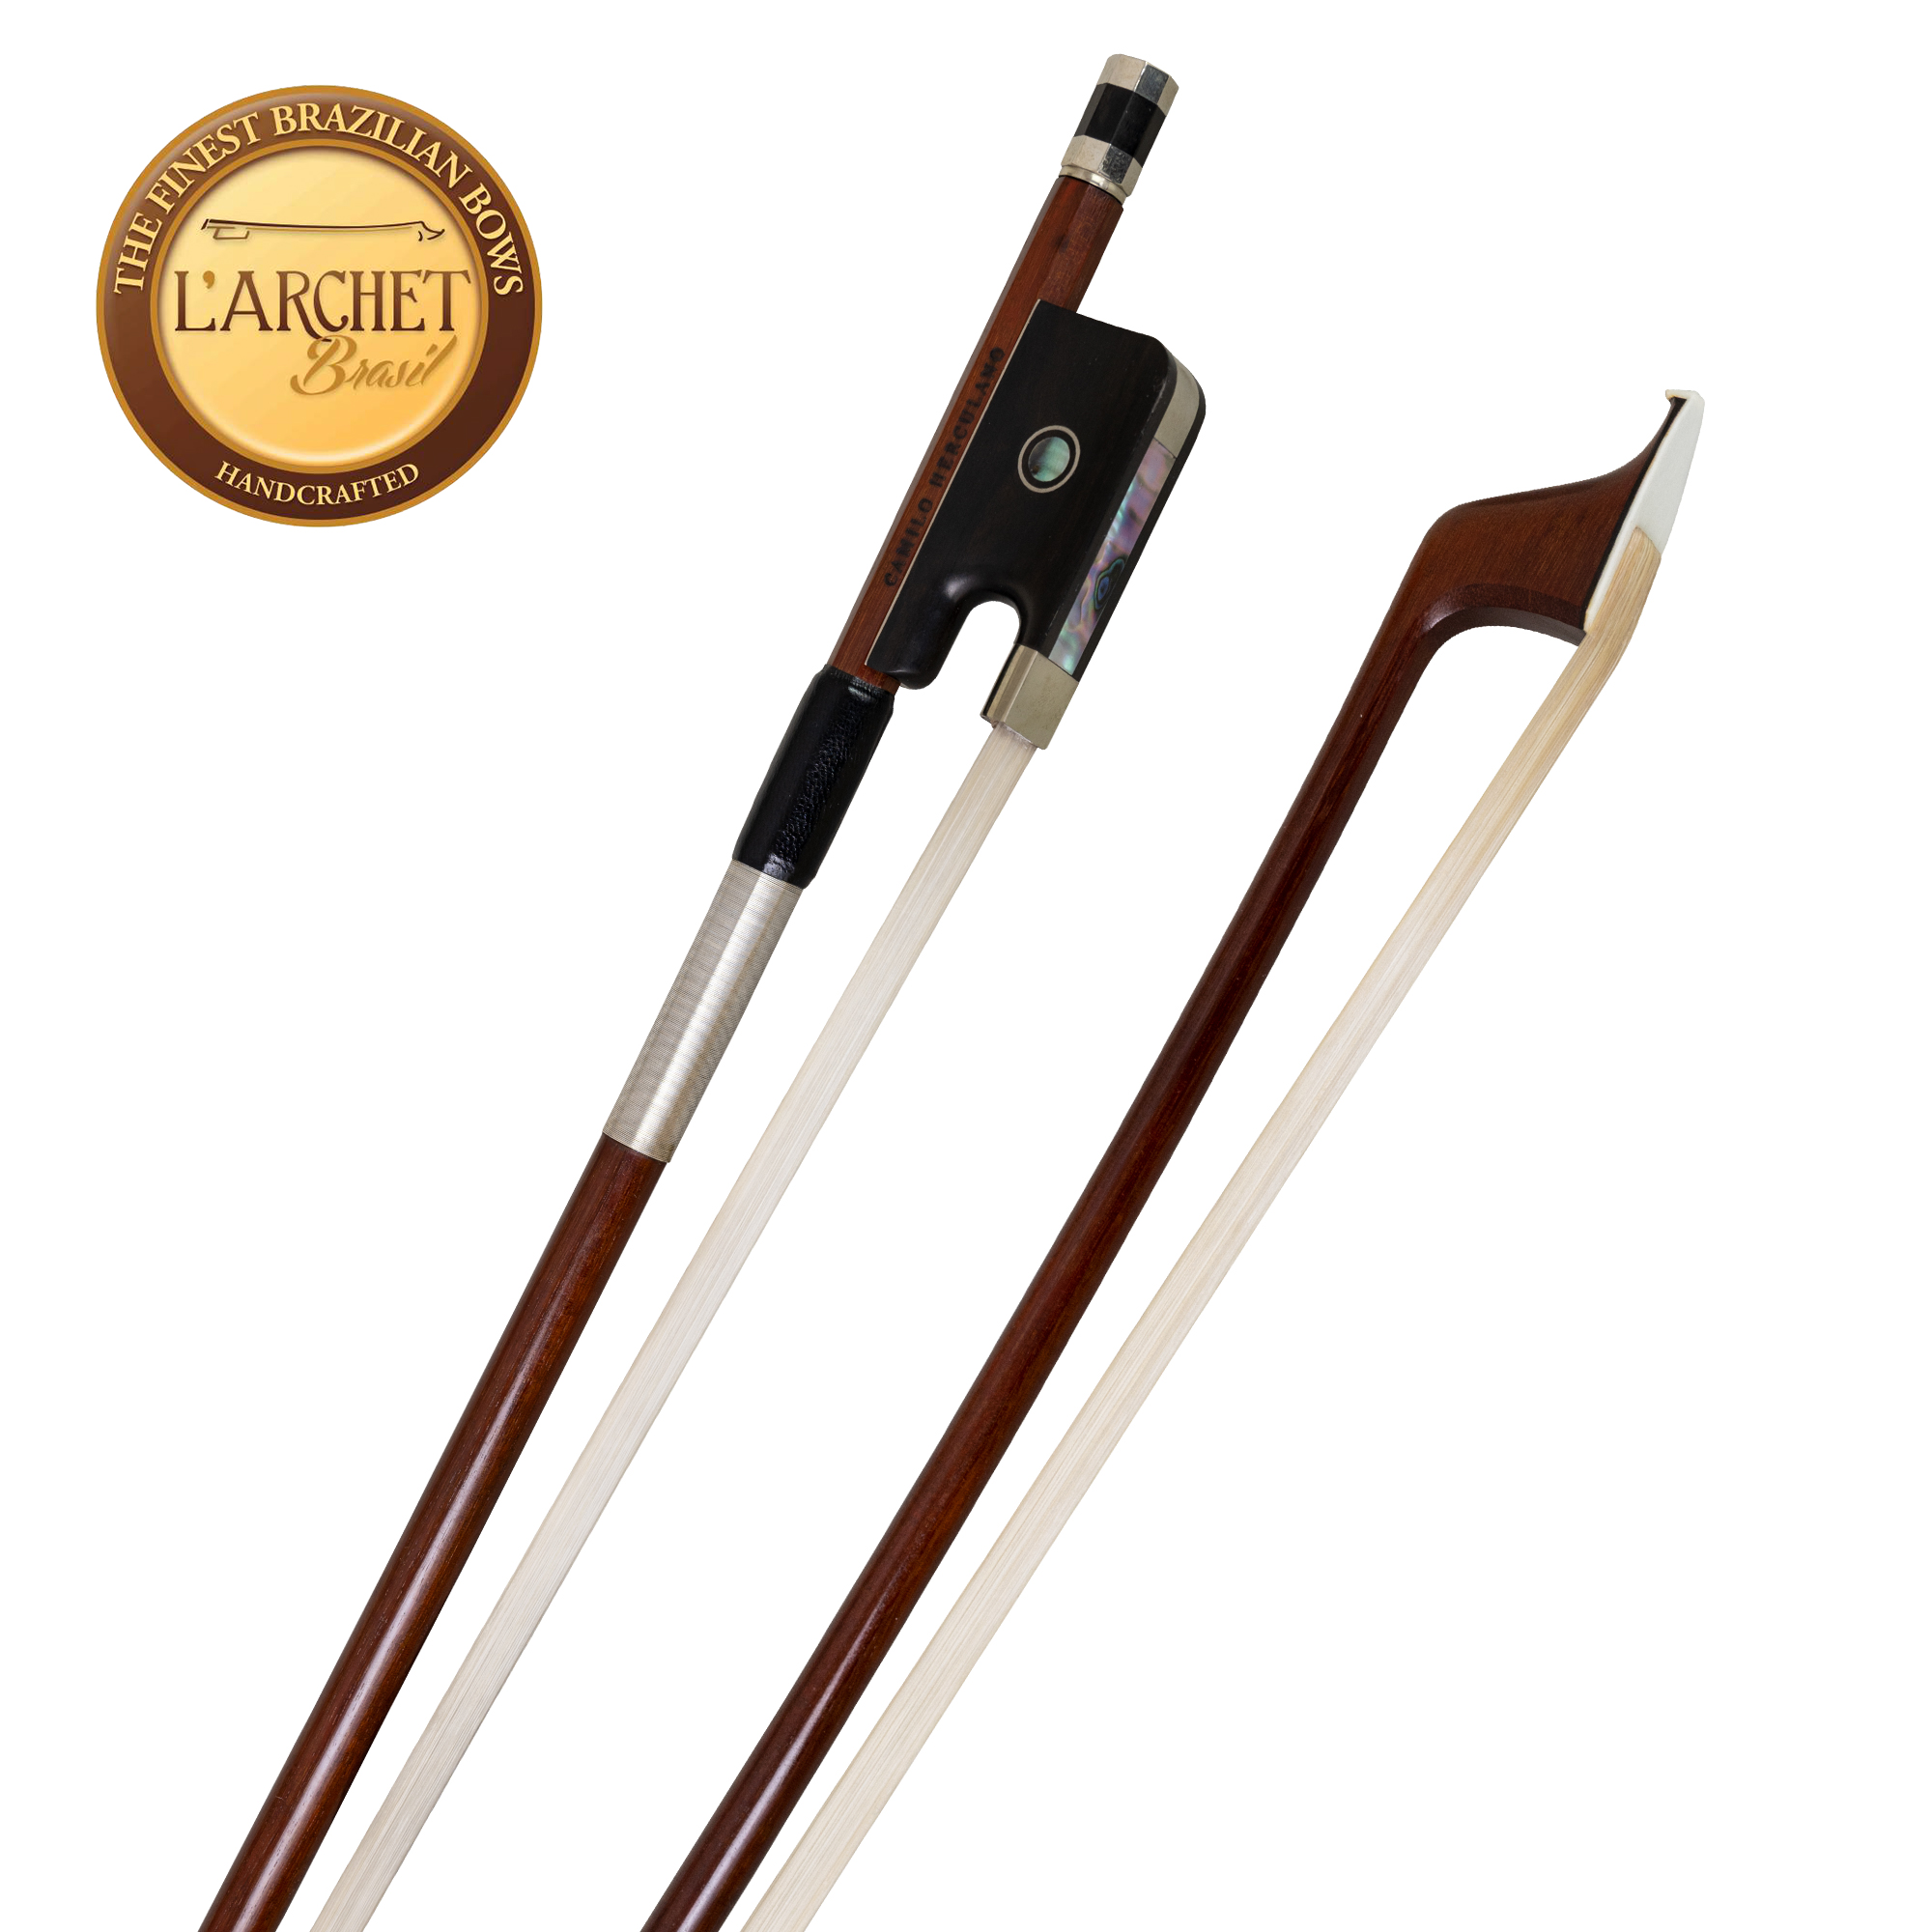 L'archet Brasil Nickel Mounted Cello Bow in action